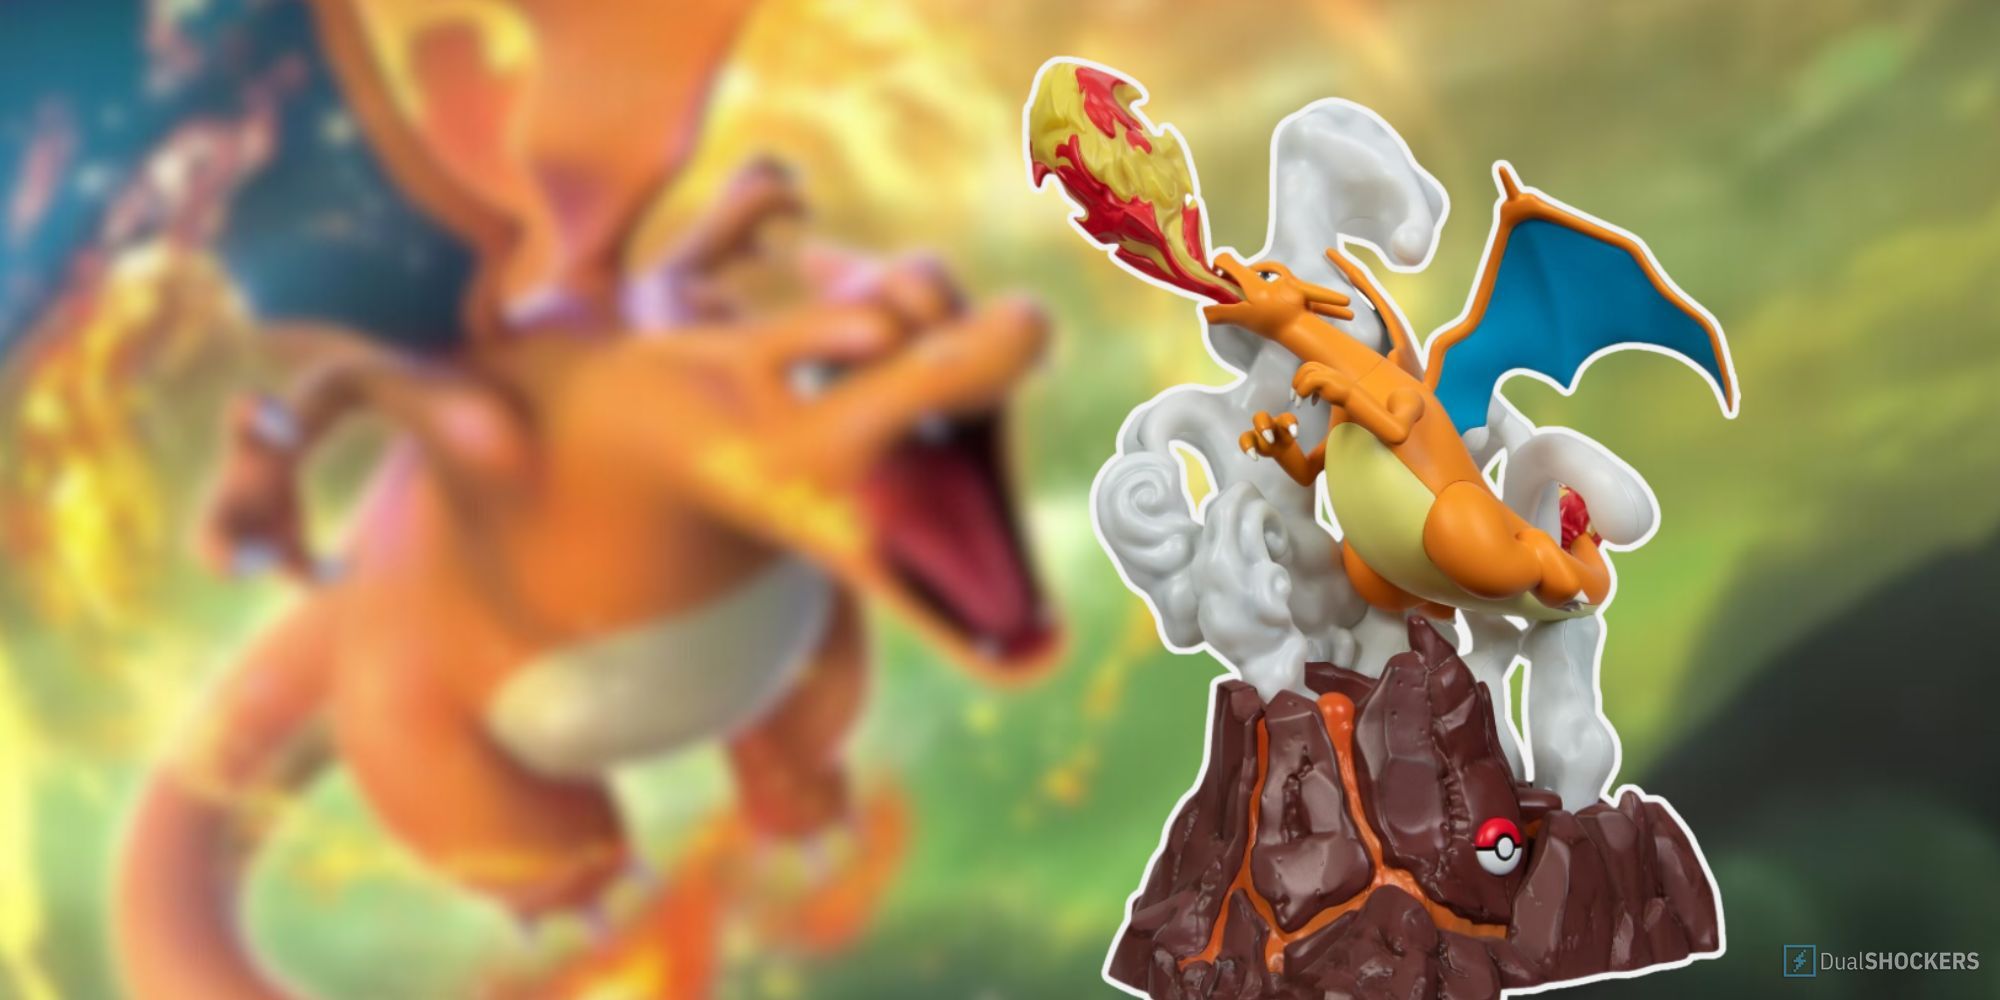 Feature image of the Pokemon Charizard Collector's Statue  with a blurred Charizard image in the background